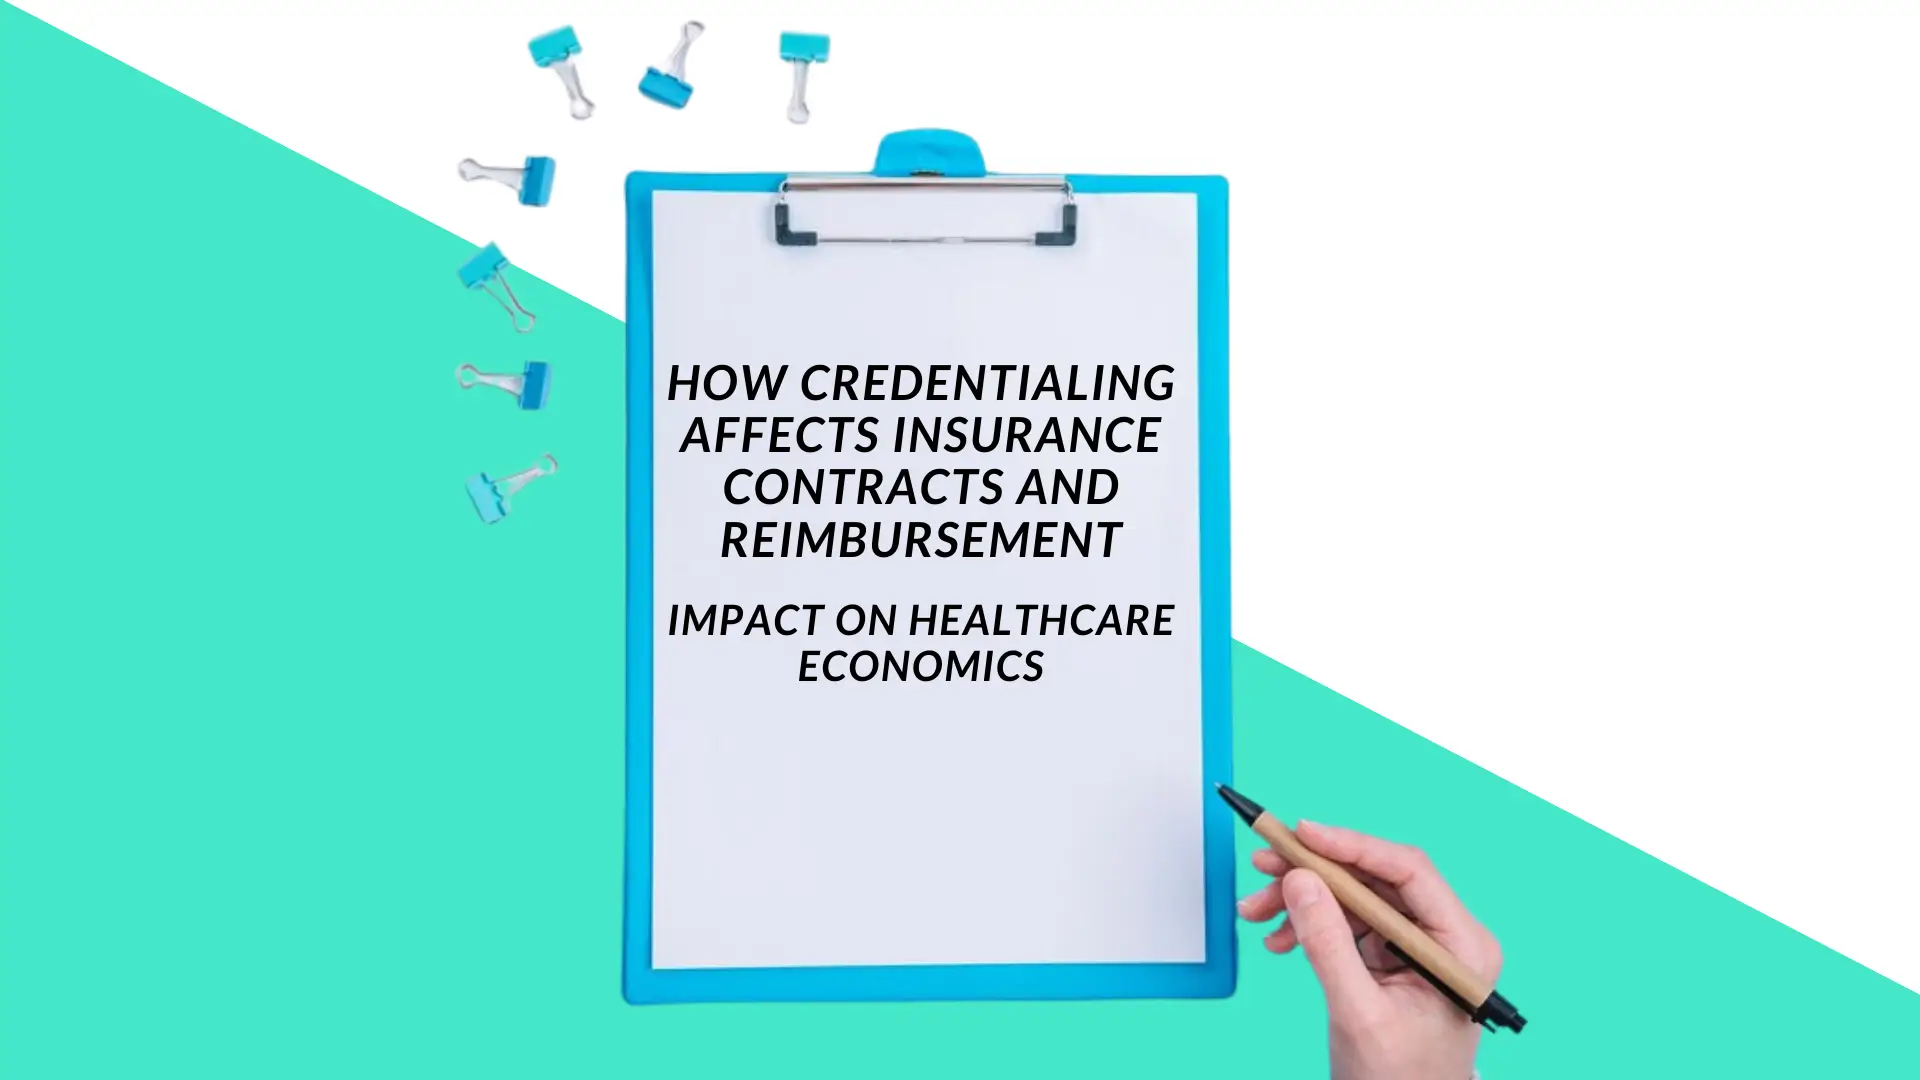 How Credentialing Affects Insurance Contracts and Reimbursement